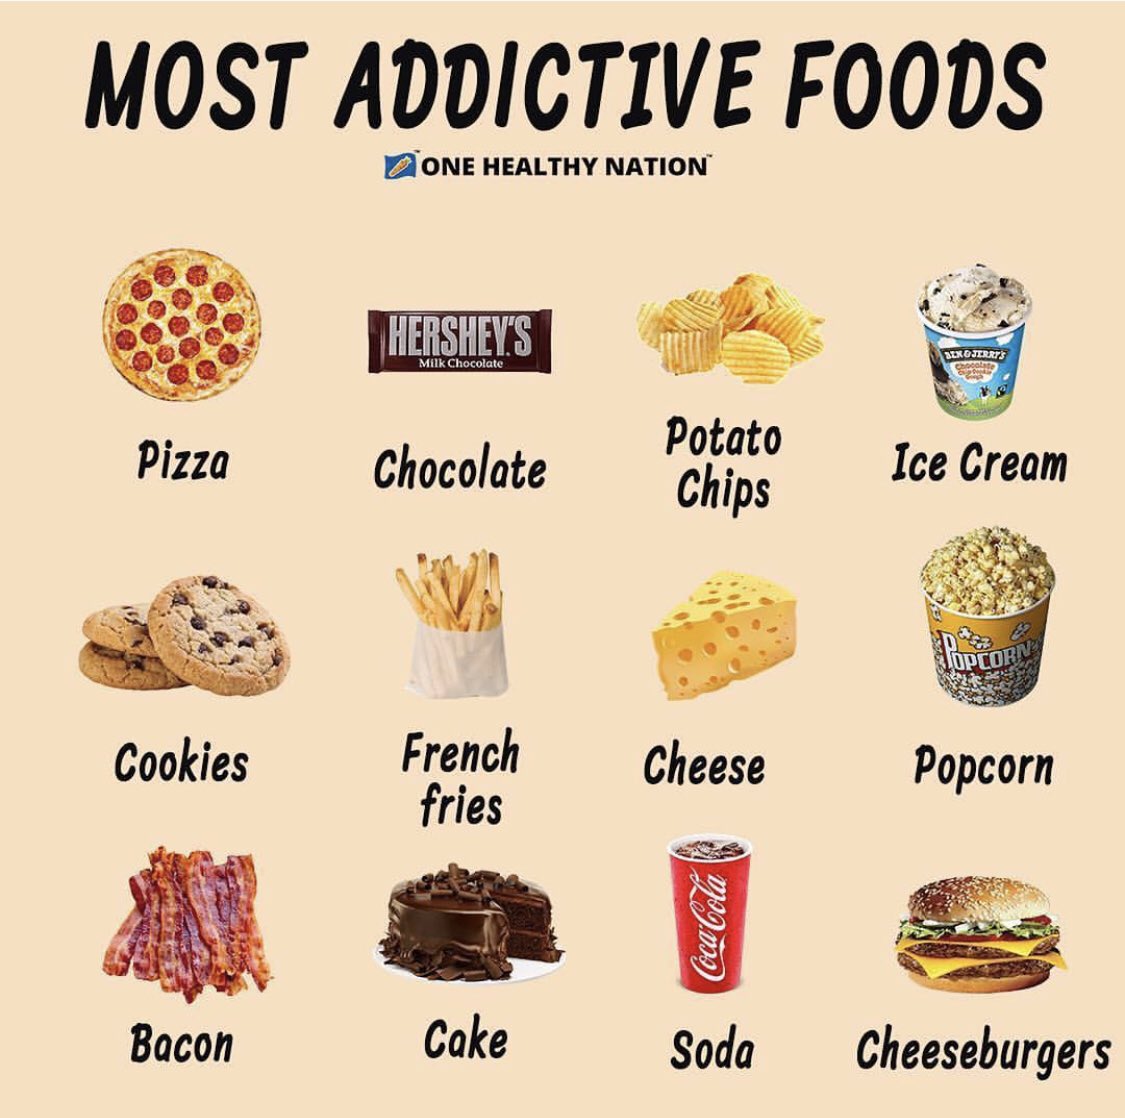 Mine is def piping hot French fries, which one is yours? #addiction #foodie #yum #frenchfries https://t.co/OSrYeuH3zc